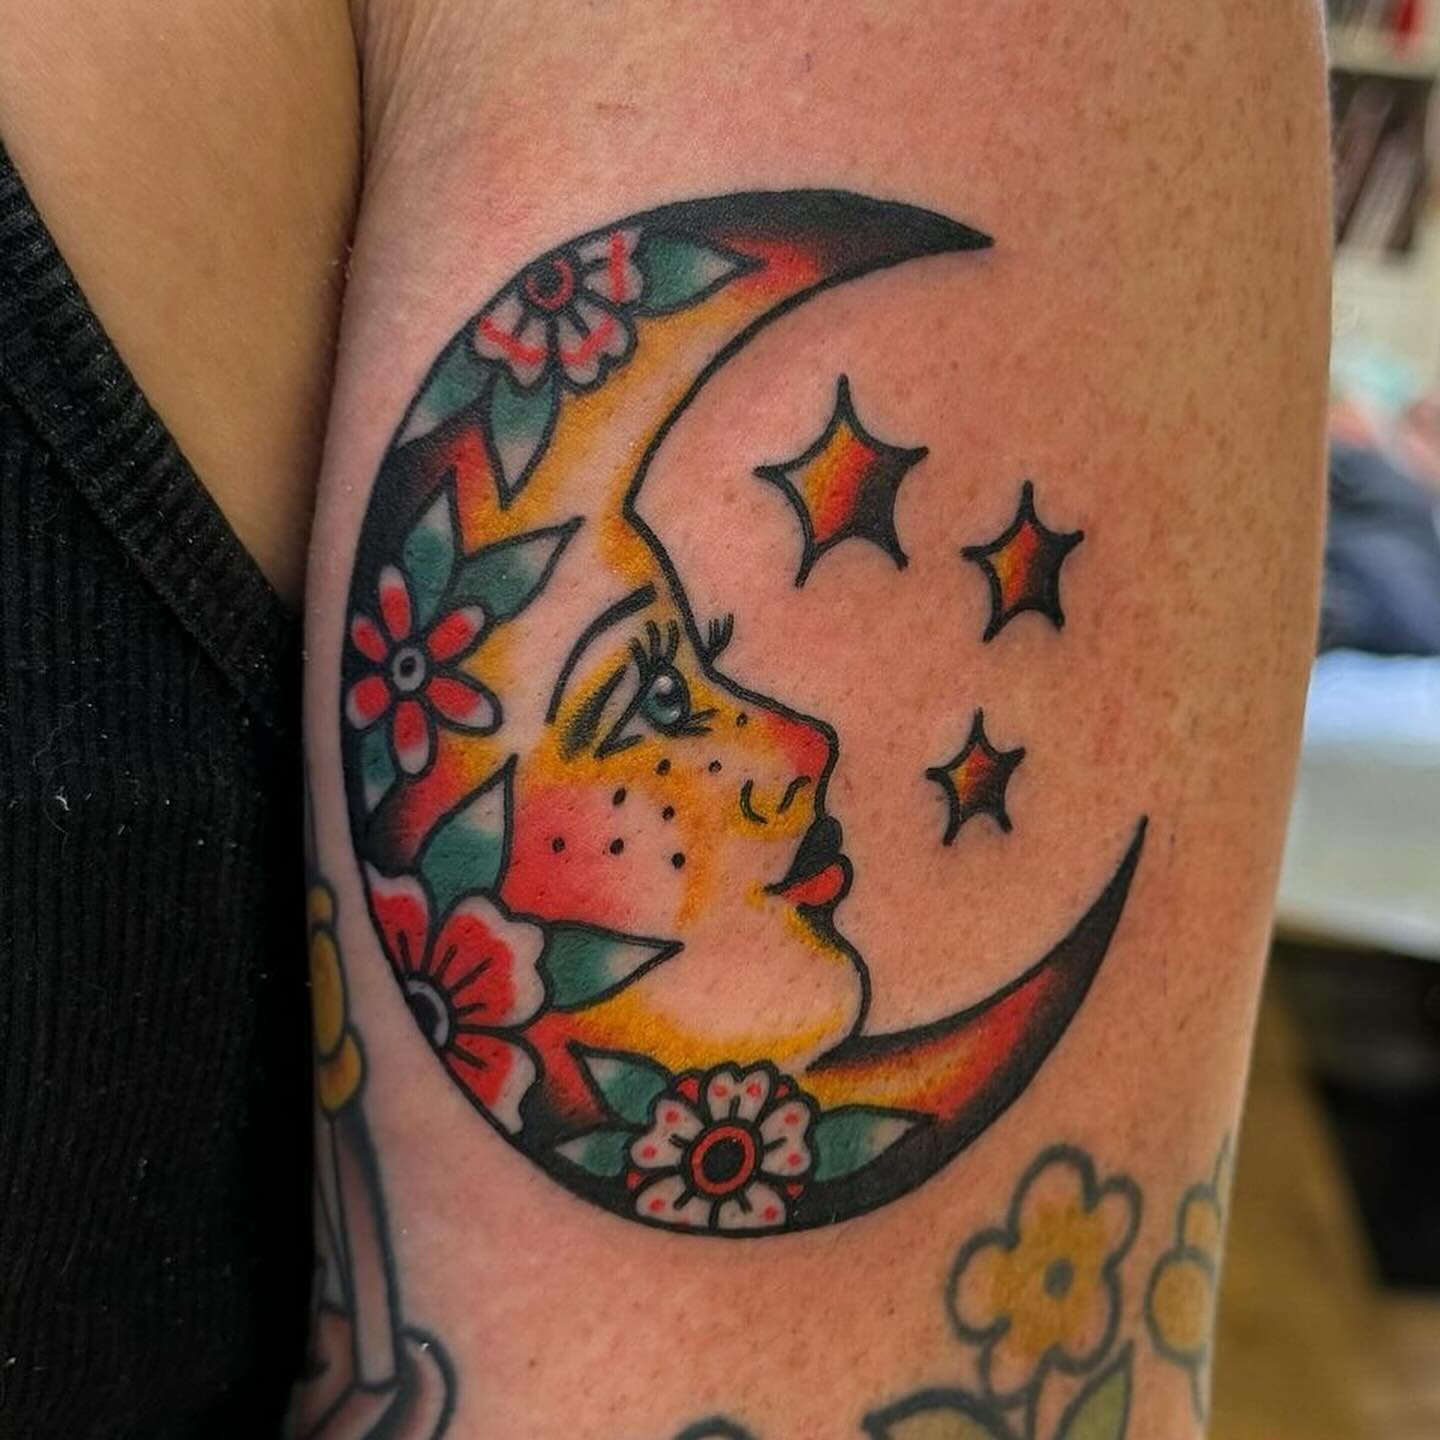 pretty moon girlie

made by: @jewelsidette - to book with Jewels, e-mail jewels.tattoo@gmail.com 😎

#moonlovers #moonovermyhammy #stars